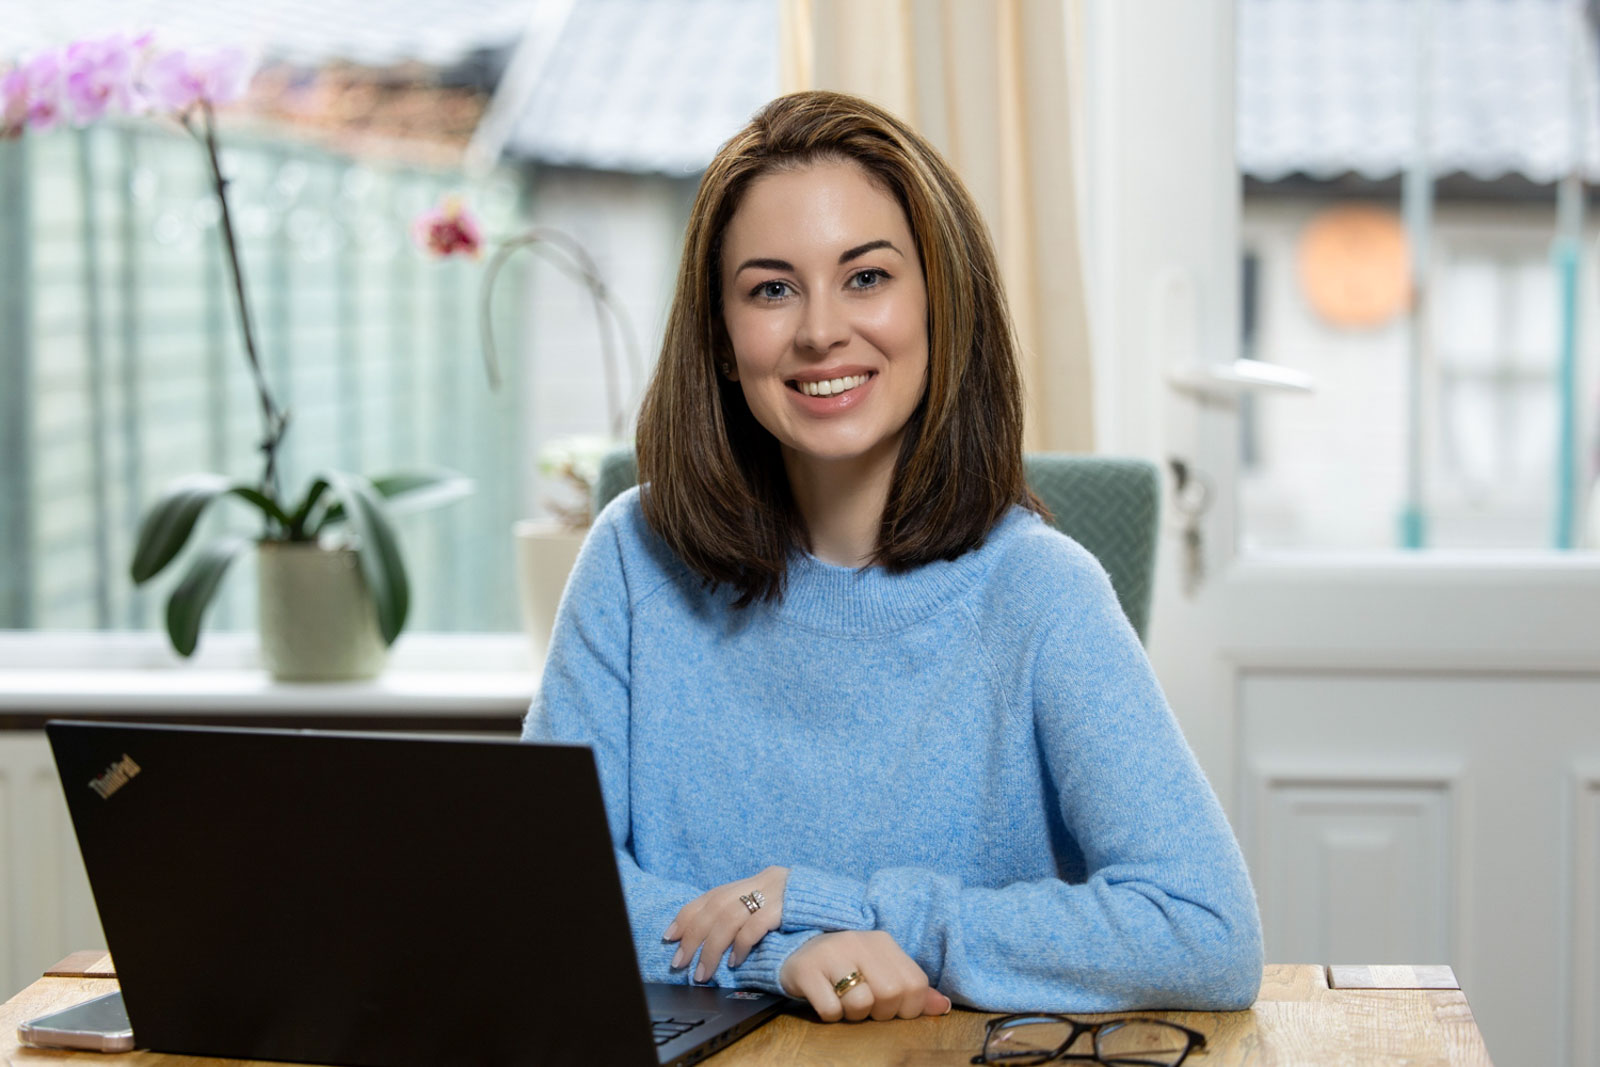 Relaxed Dublin headshot of woman at kitchen table with laptop smiling